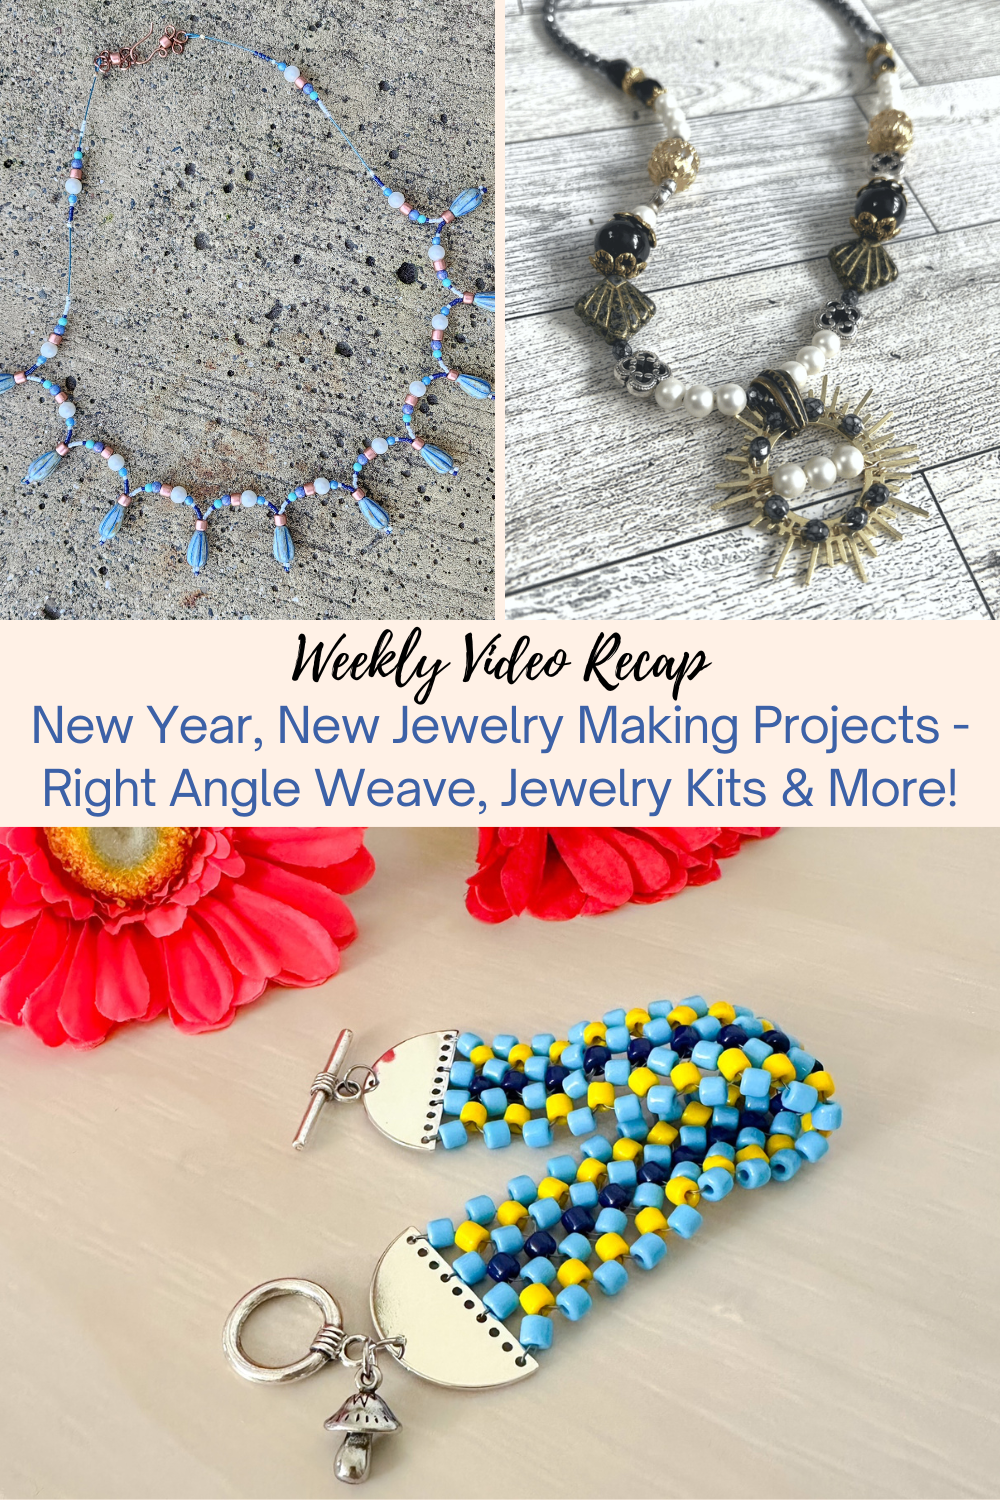 New Year, New Jewelry Making Projects - Right Angle Weave, Jewelry Kits & More! Collage